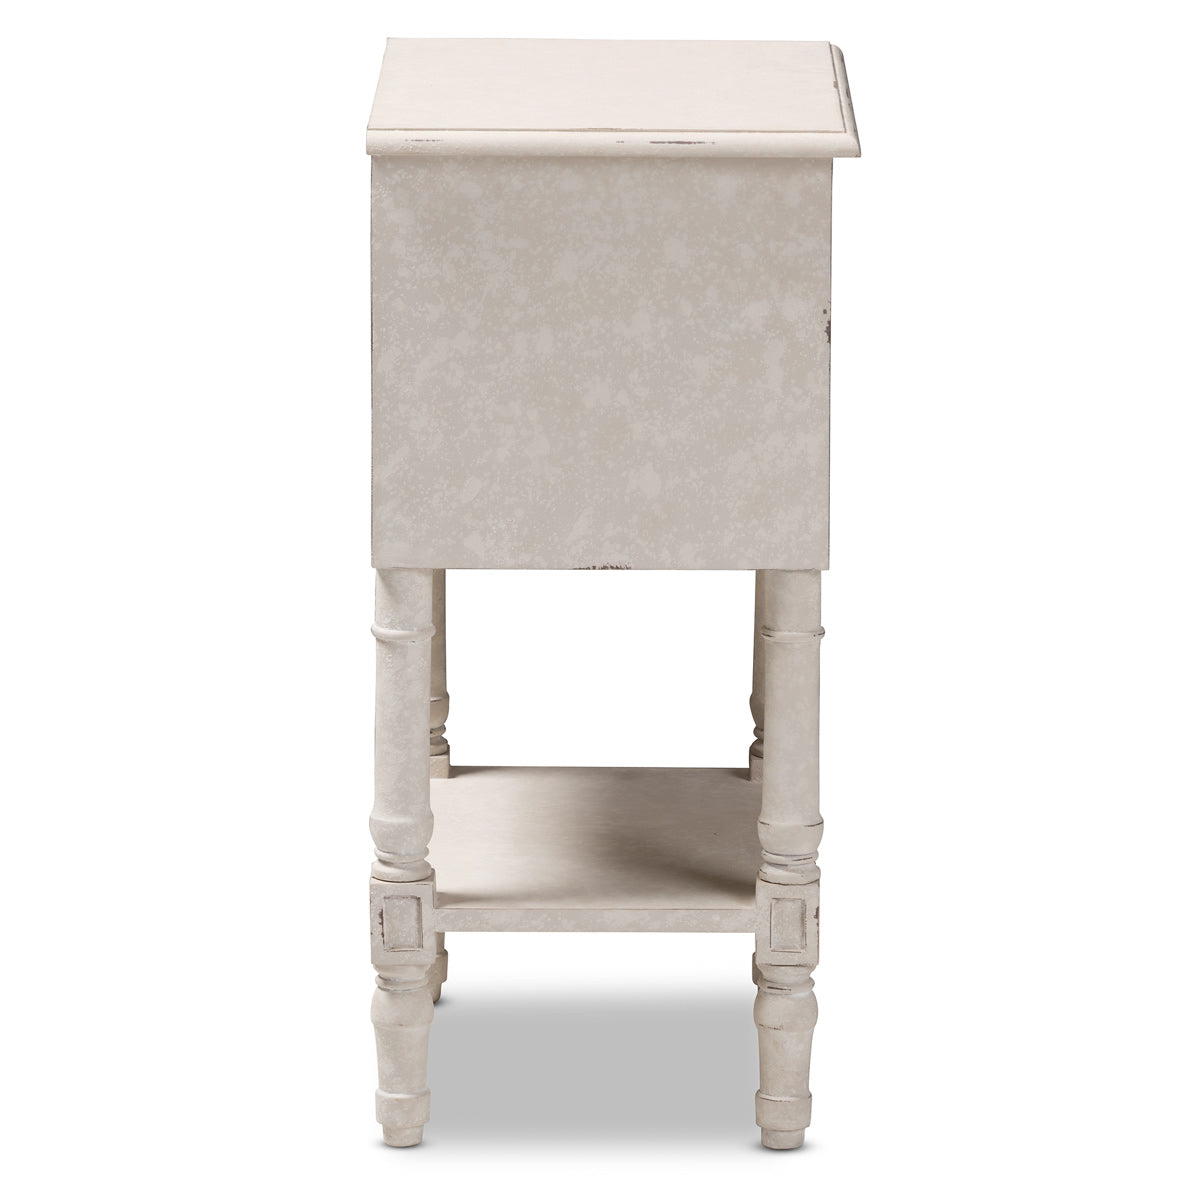 Baxton Studio Lenore Country Cottage Farmhouse Whitewashed 2-Drawer Nightstand Baxton Studio-nightstands-Minimal And Modern - 4